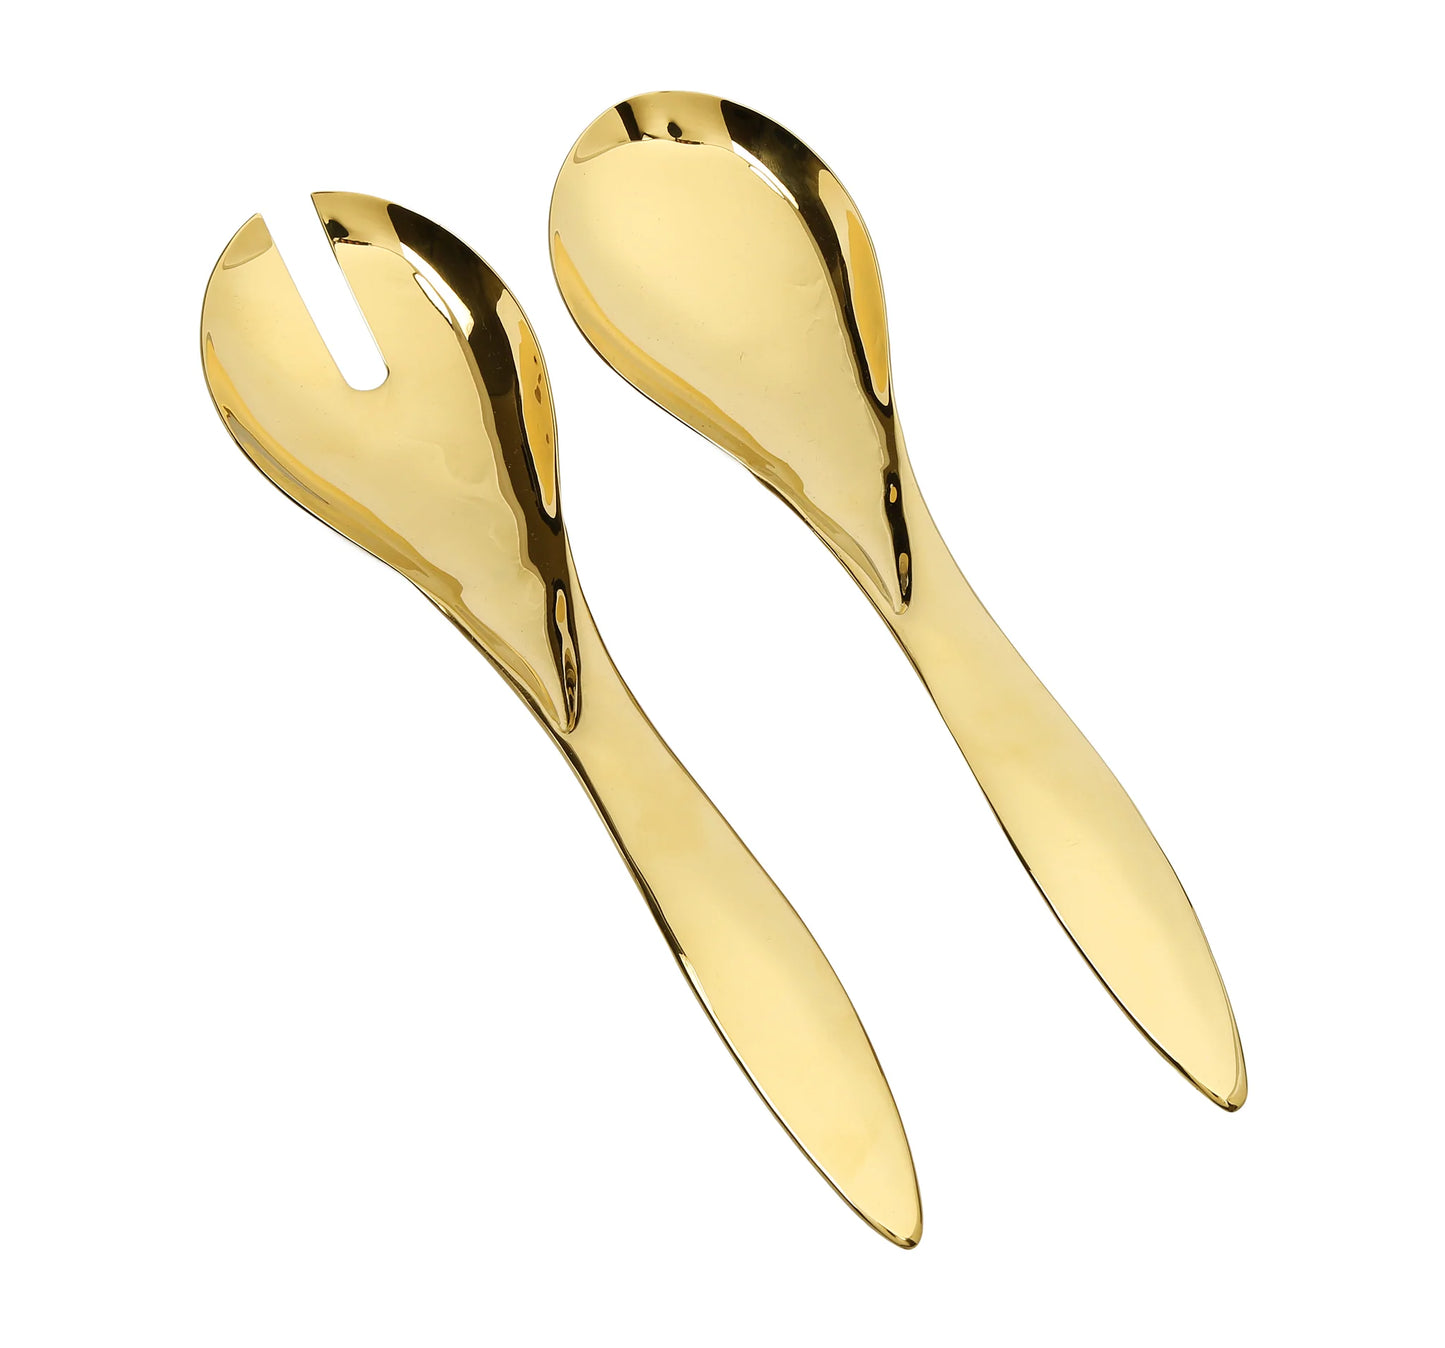 Shiny Gold Salad Servers - Jubilee Party